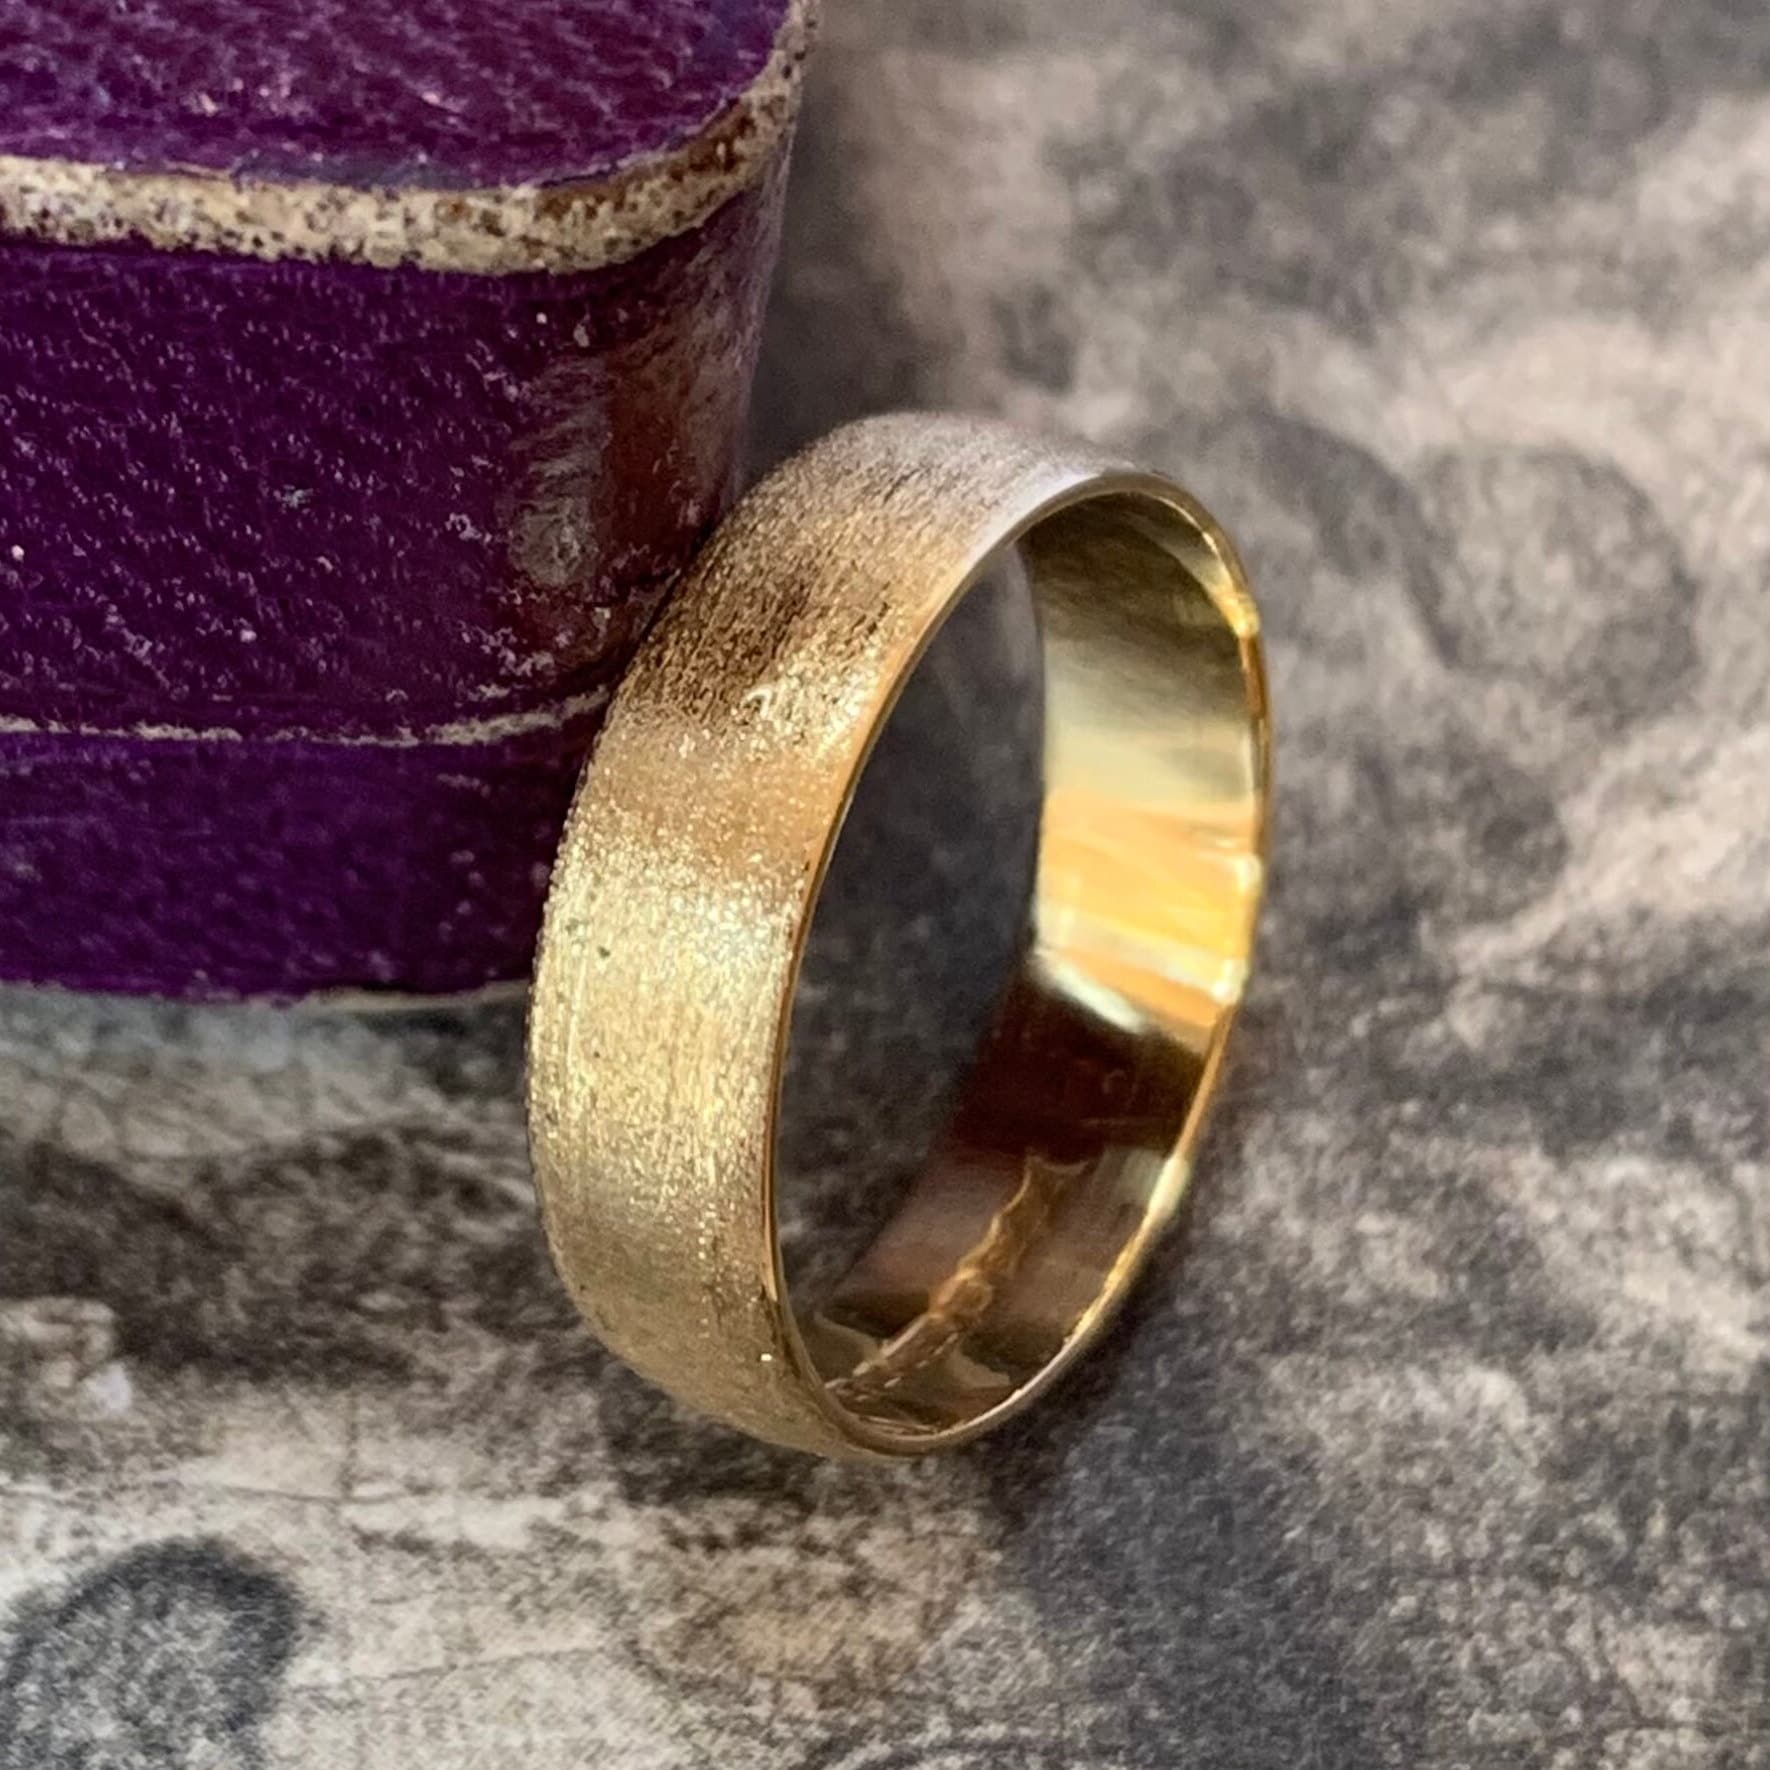 Vintage 5mm Gold Ring Made in England. 18Ct Yellow That Has A Light Frosted Finish To The Band